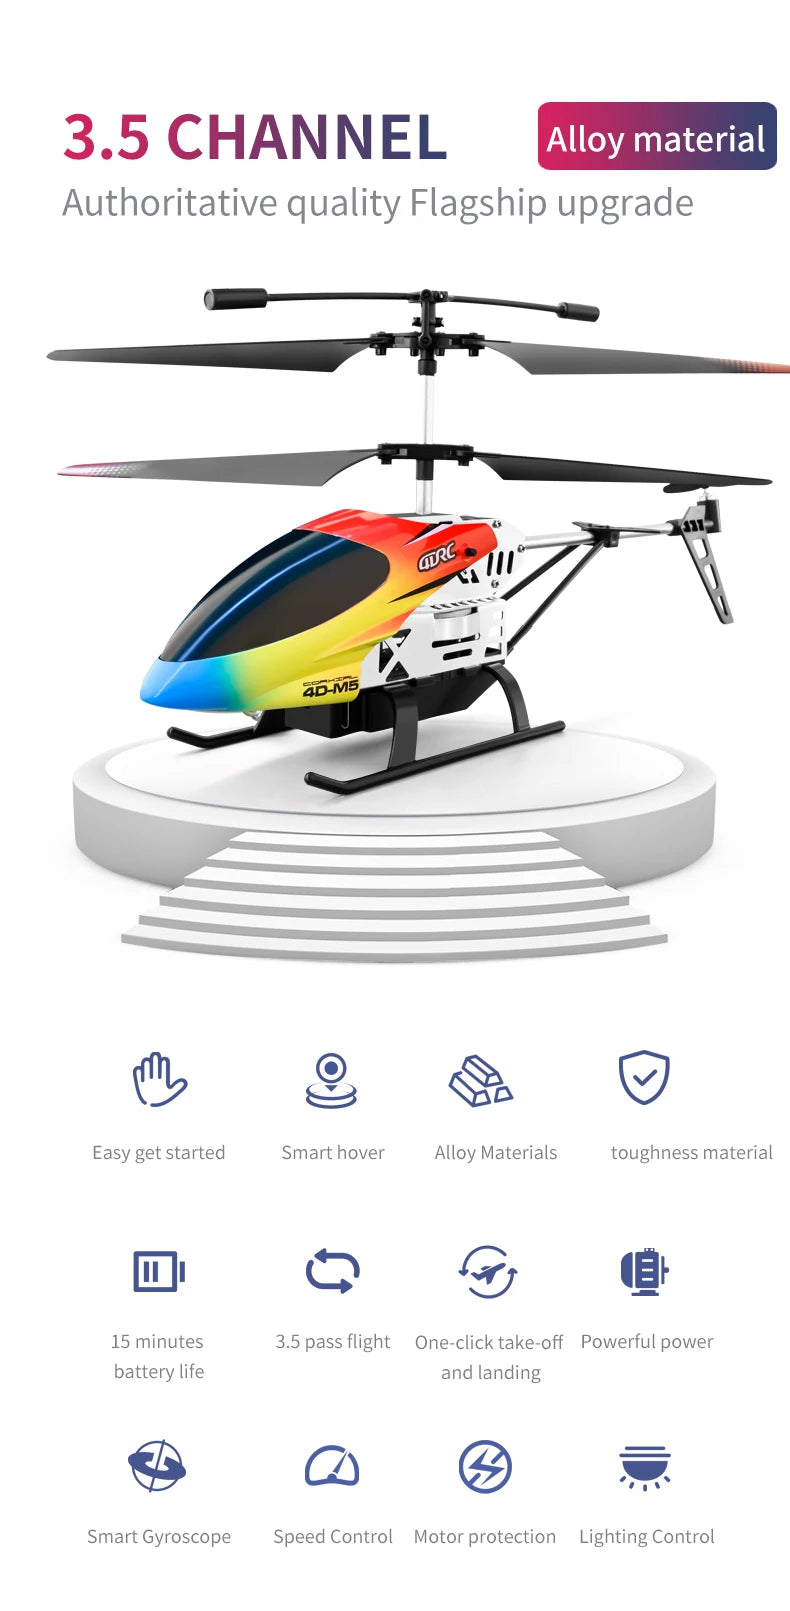 4DRC M5 RC Helicopter, 3.5 CHANNEL material Authoritative quality Flagship upgrade Easy get started Smart hover